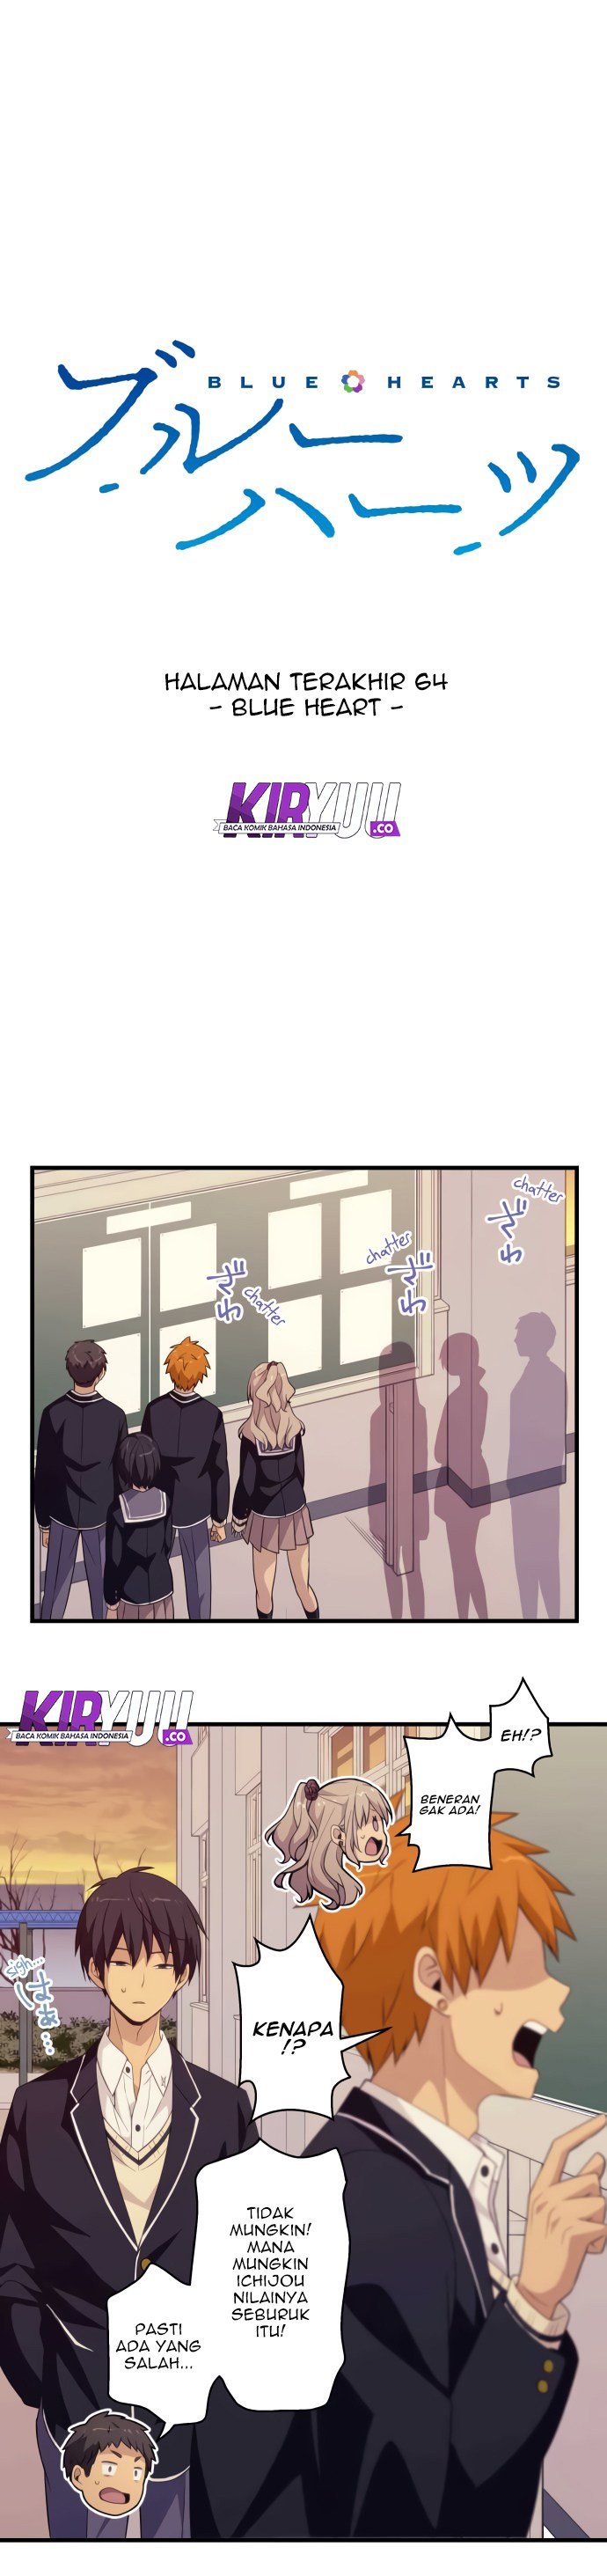 Blue Hearts Chapter 64